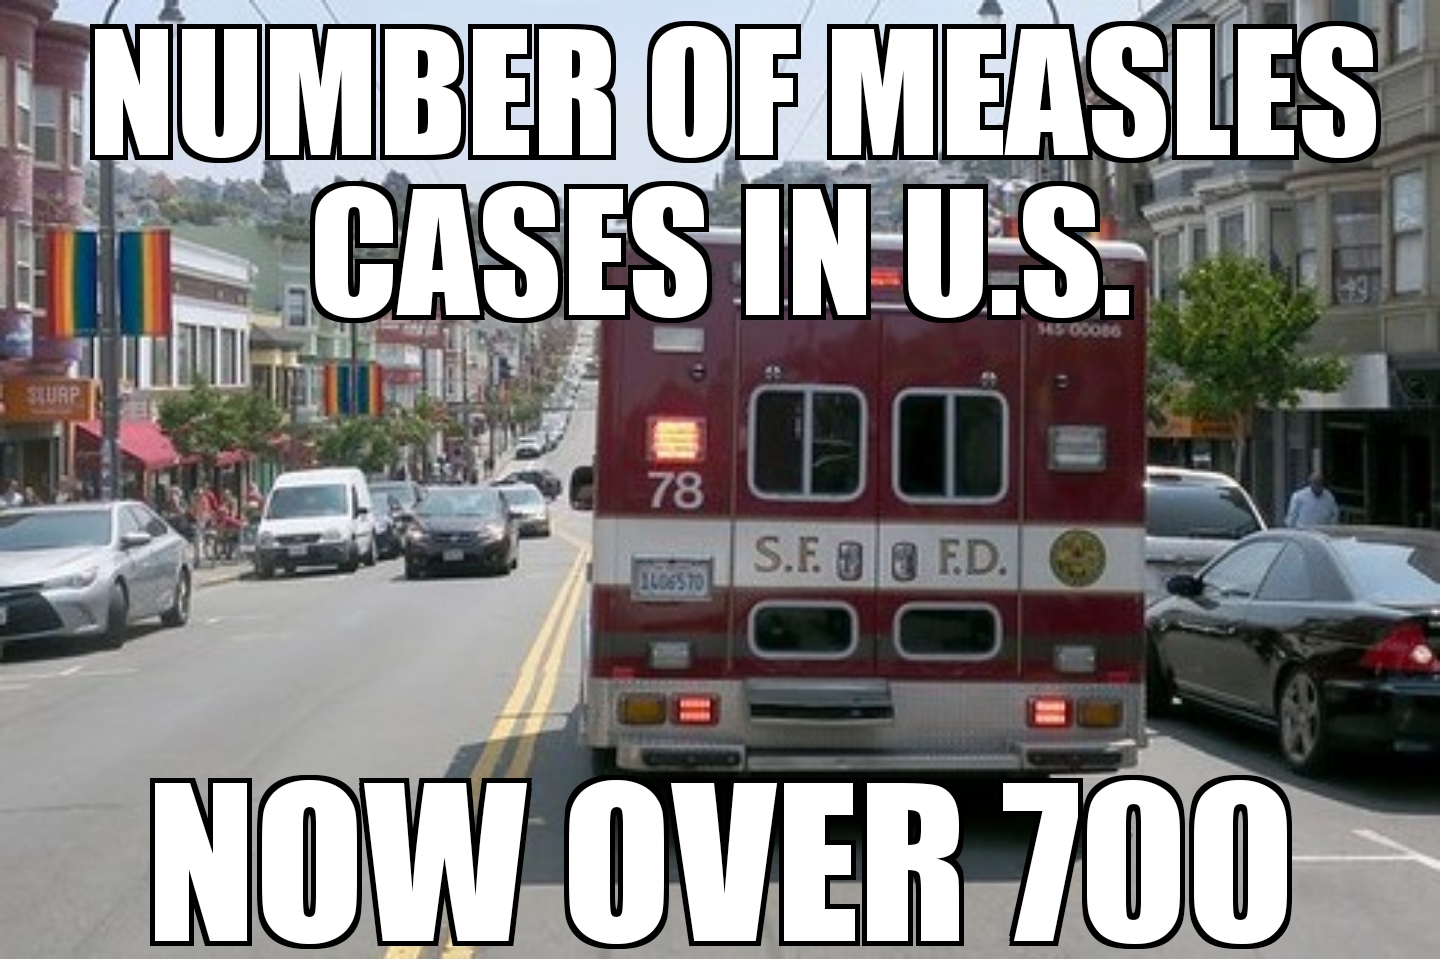 U.S. measles cases over 700